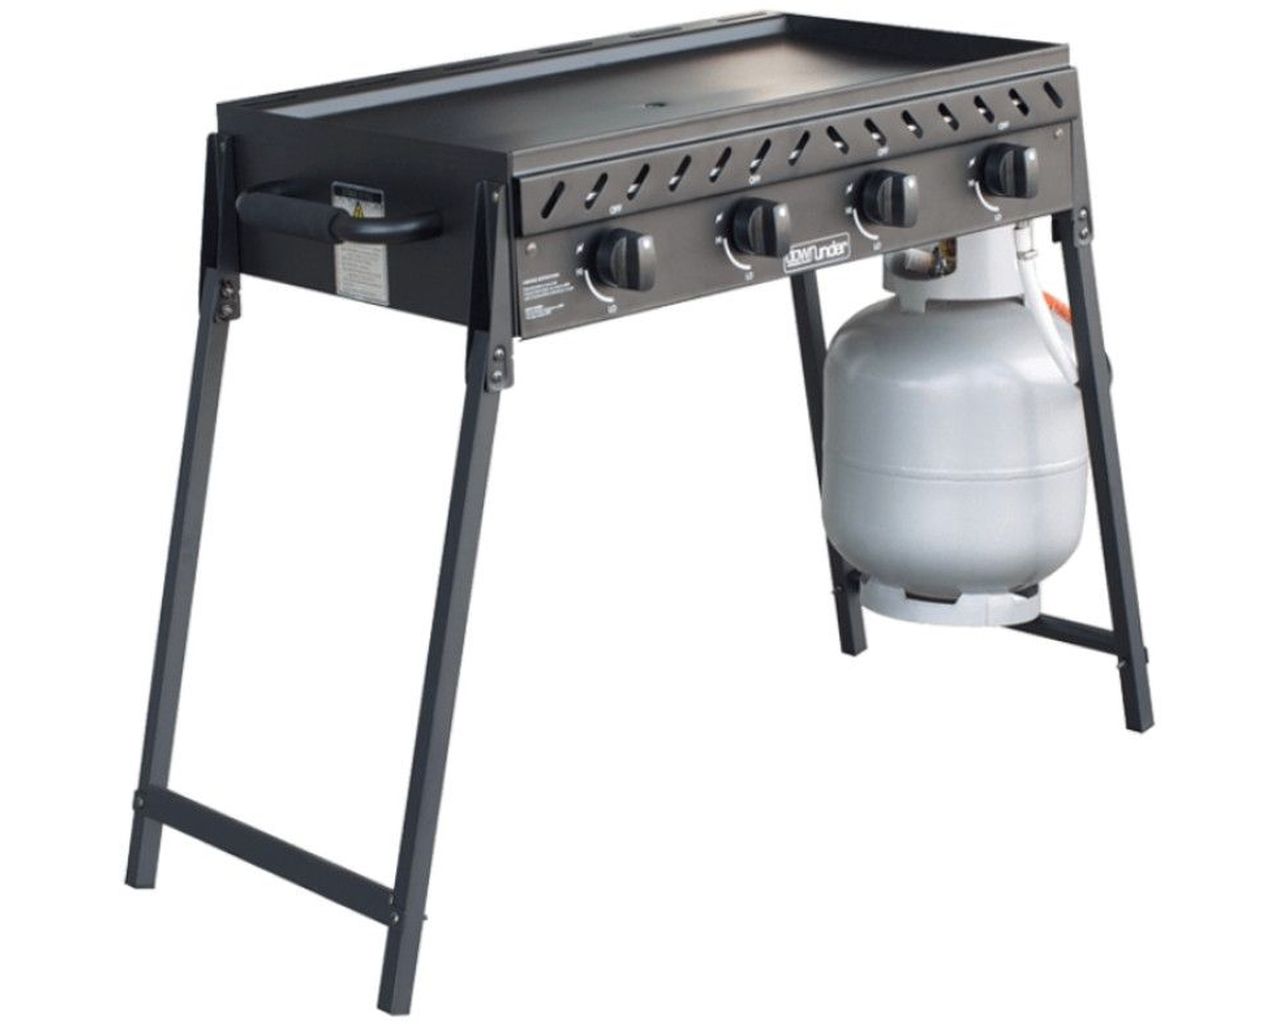 Barbeques Galore 17x11 Hot Plate